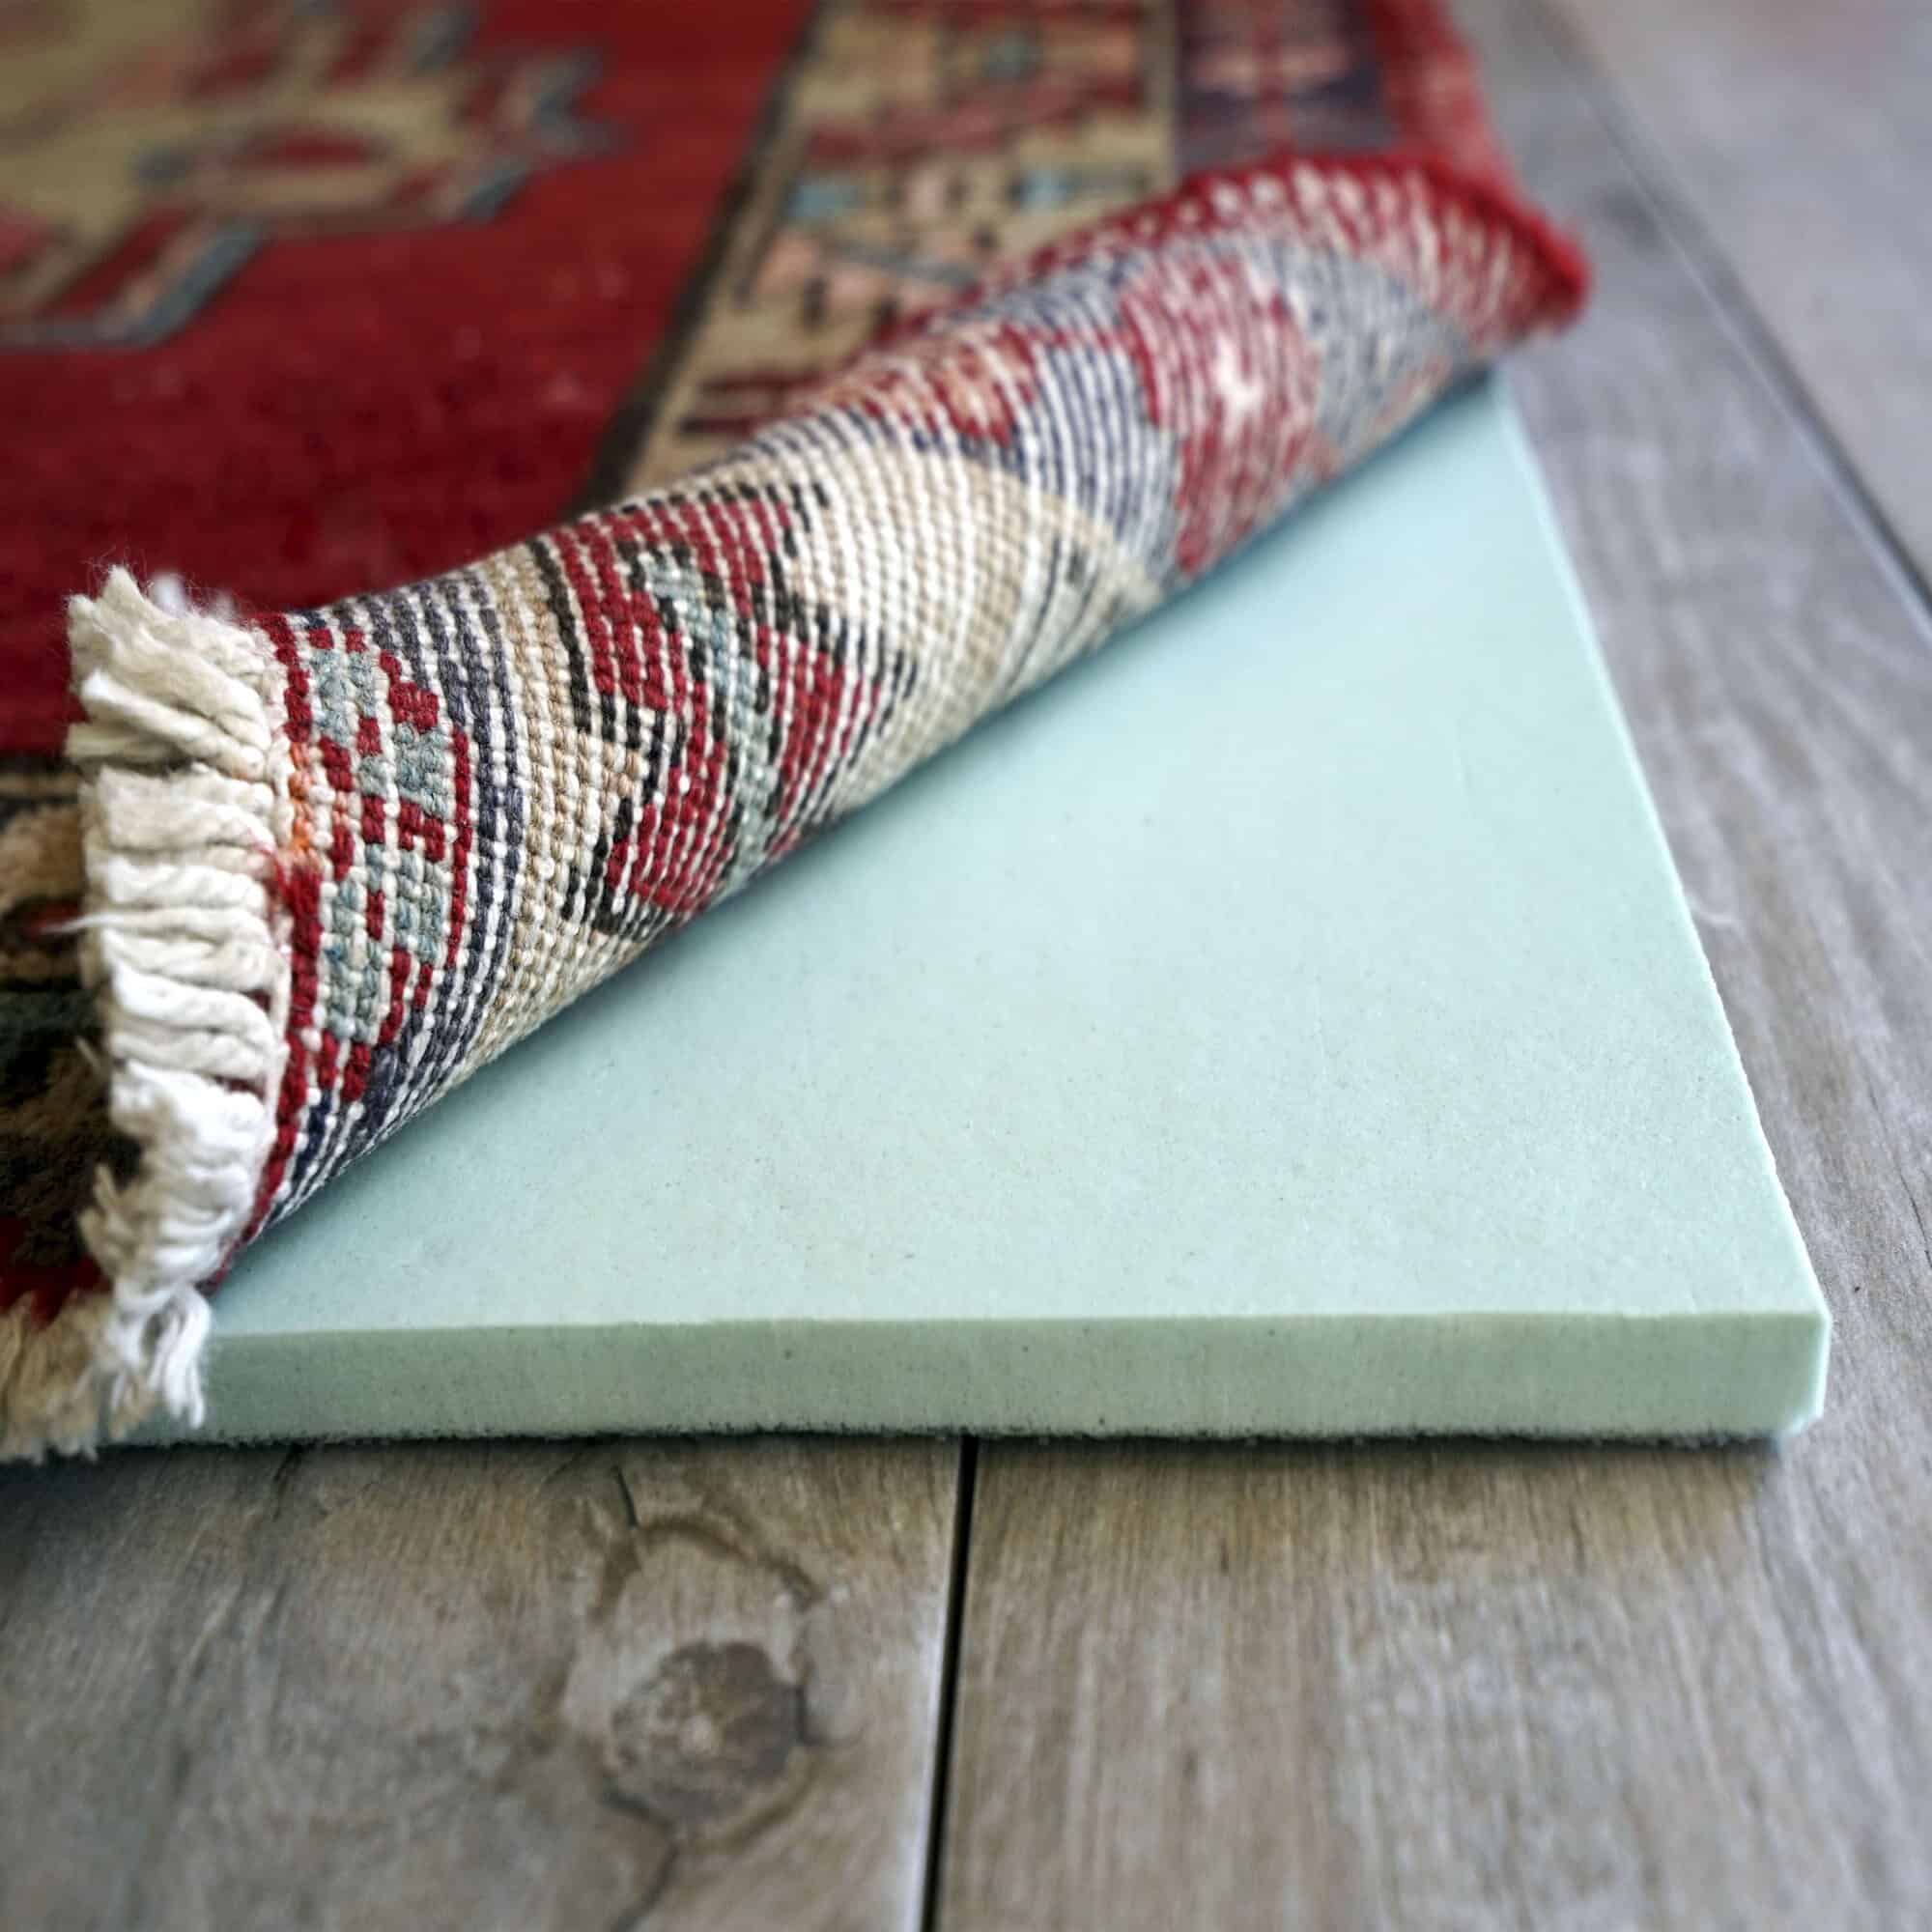 A Rug Pad Made Of Memory Foam Will Make You Feel Like You're Walking On Clouds